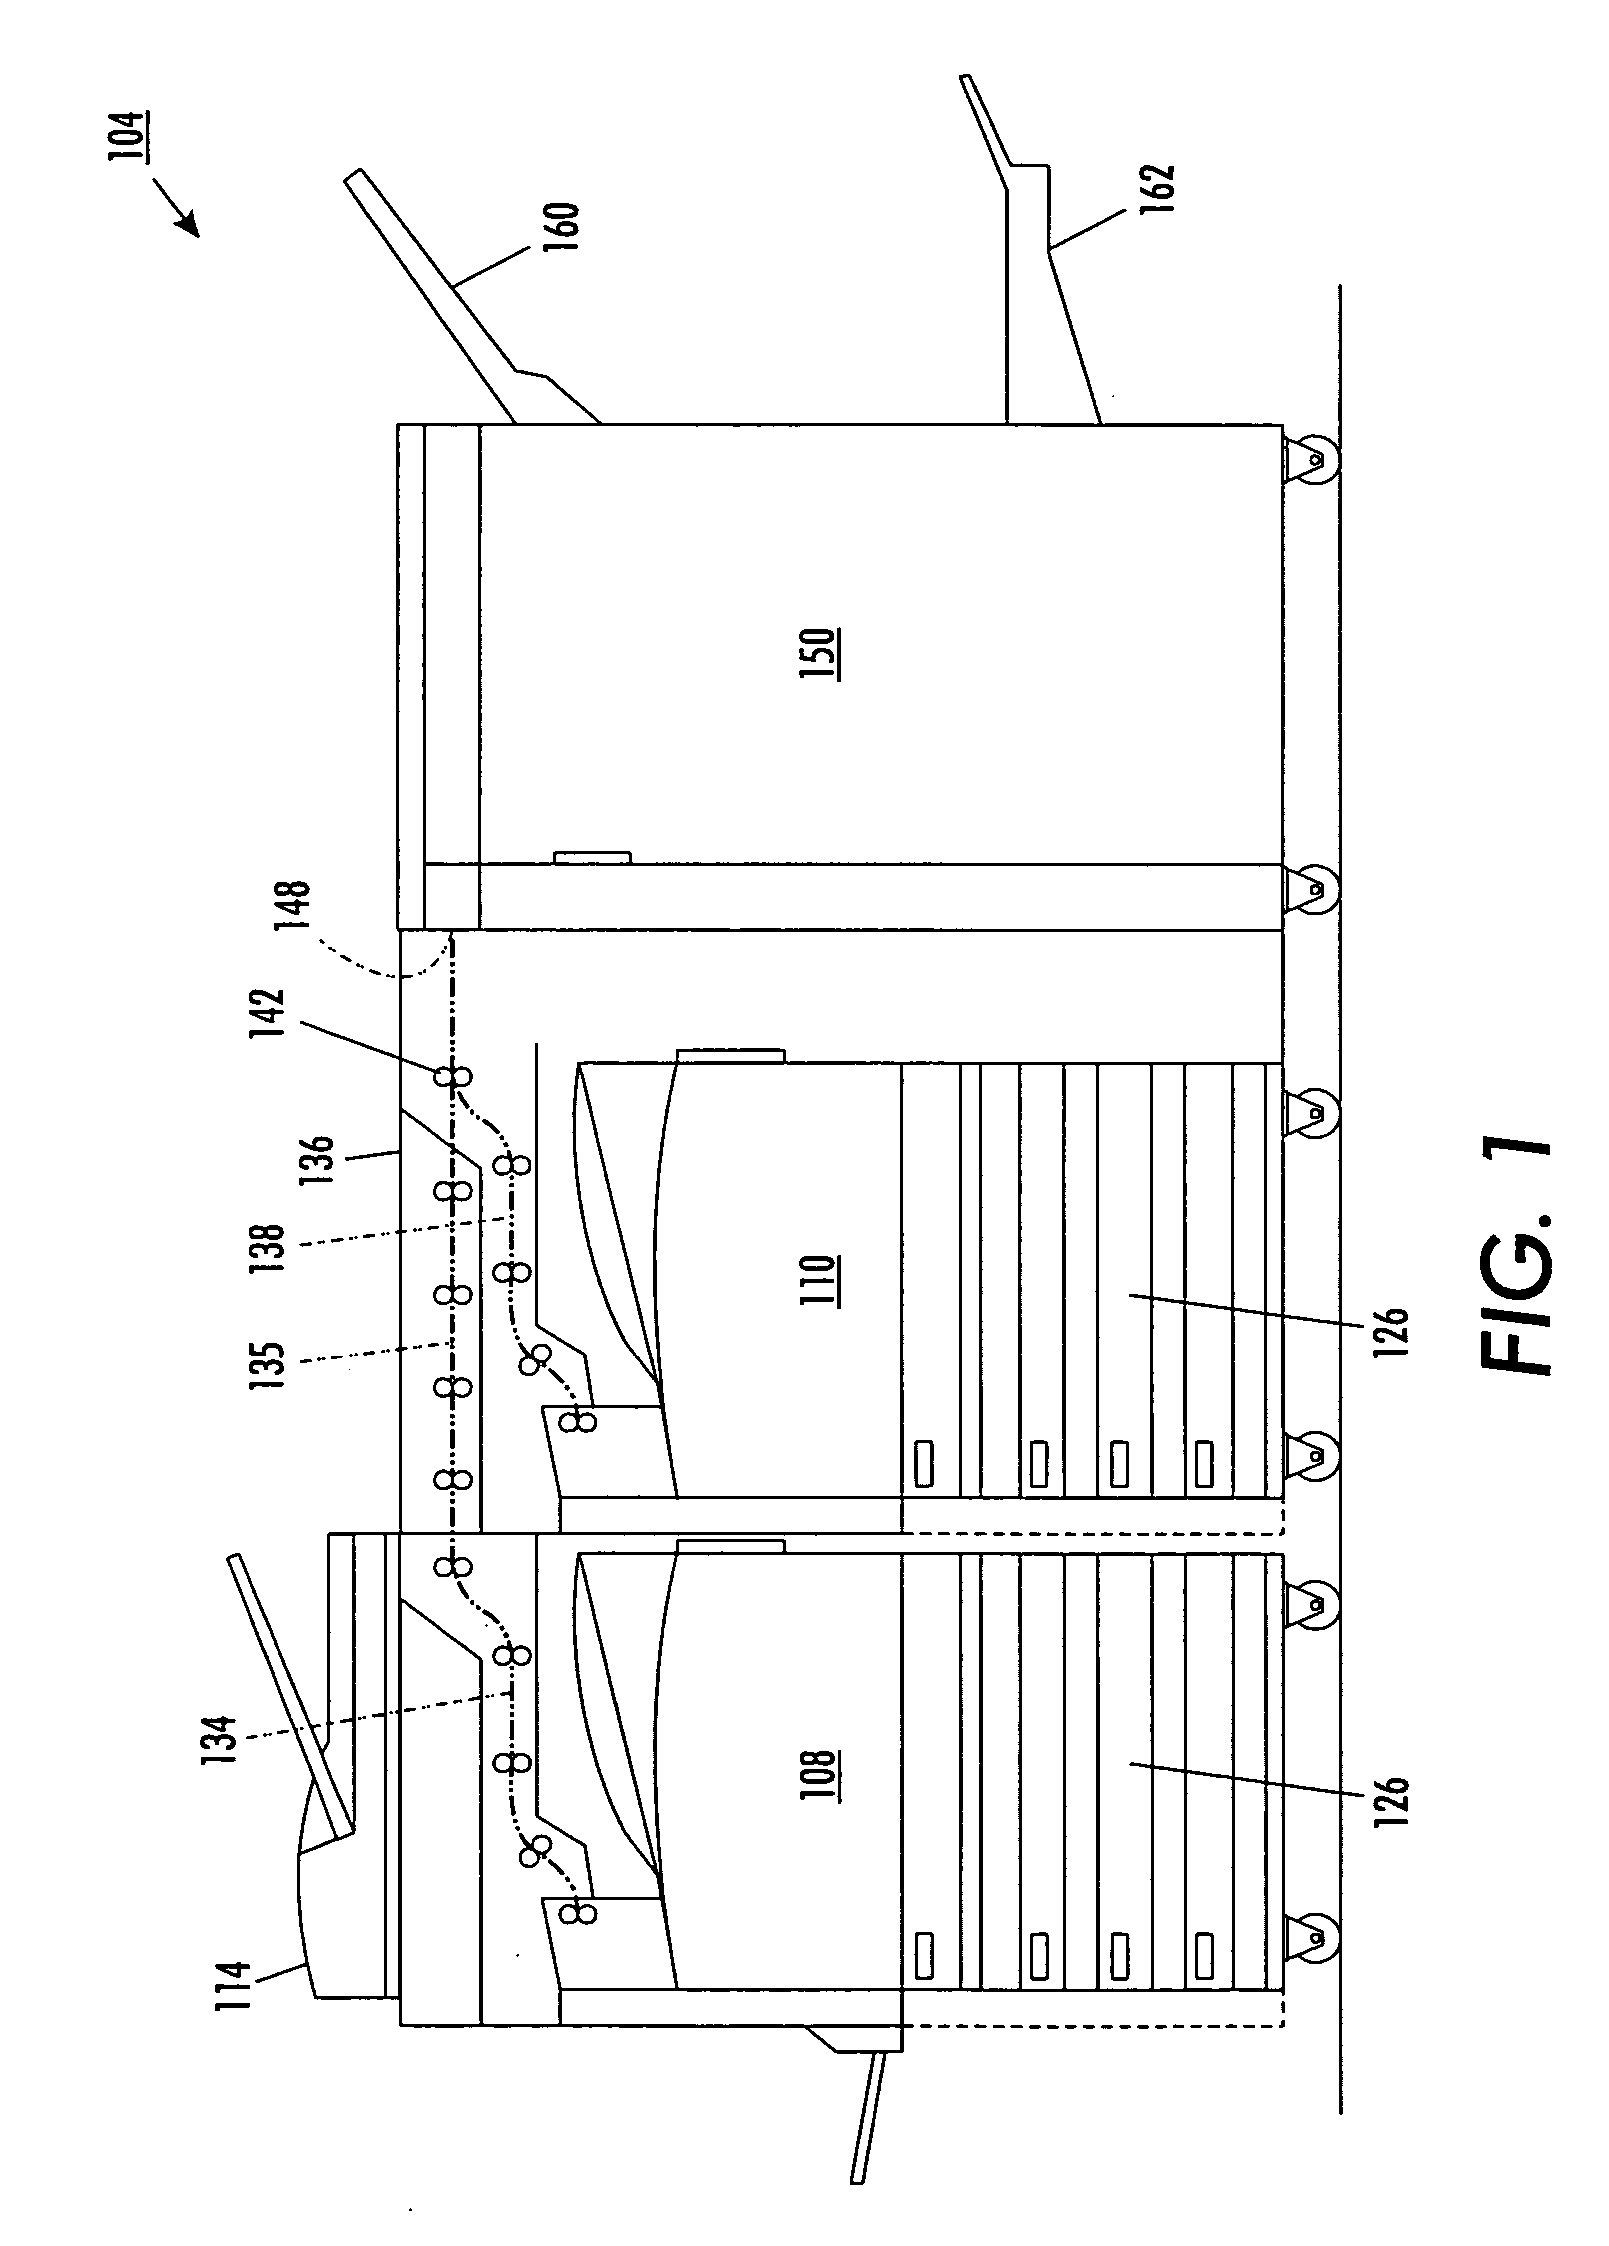 Semi-automatic image quality adjustment for multiple marking engine systems